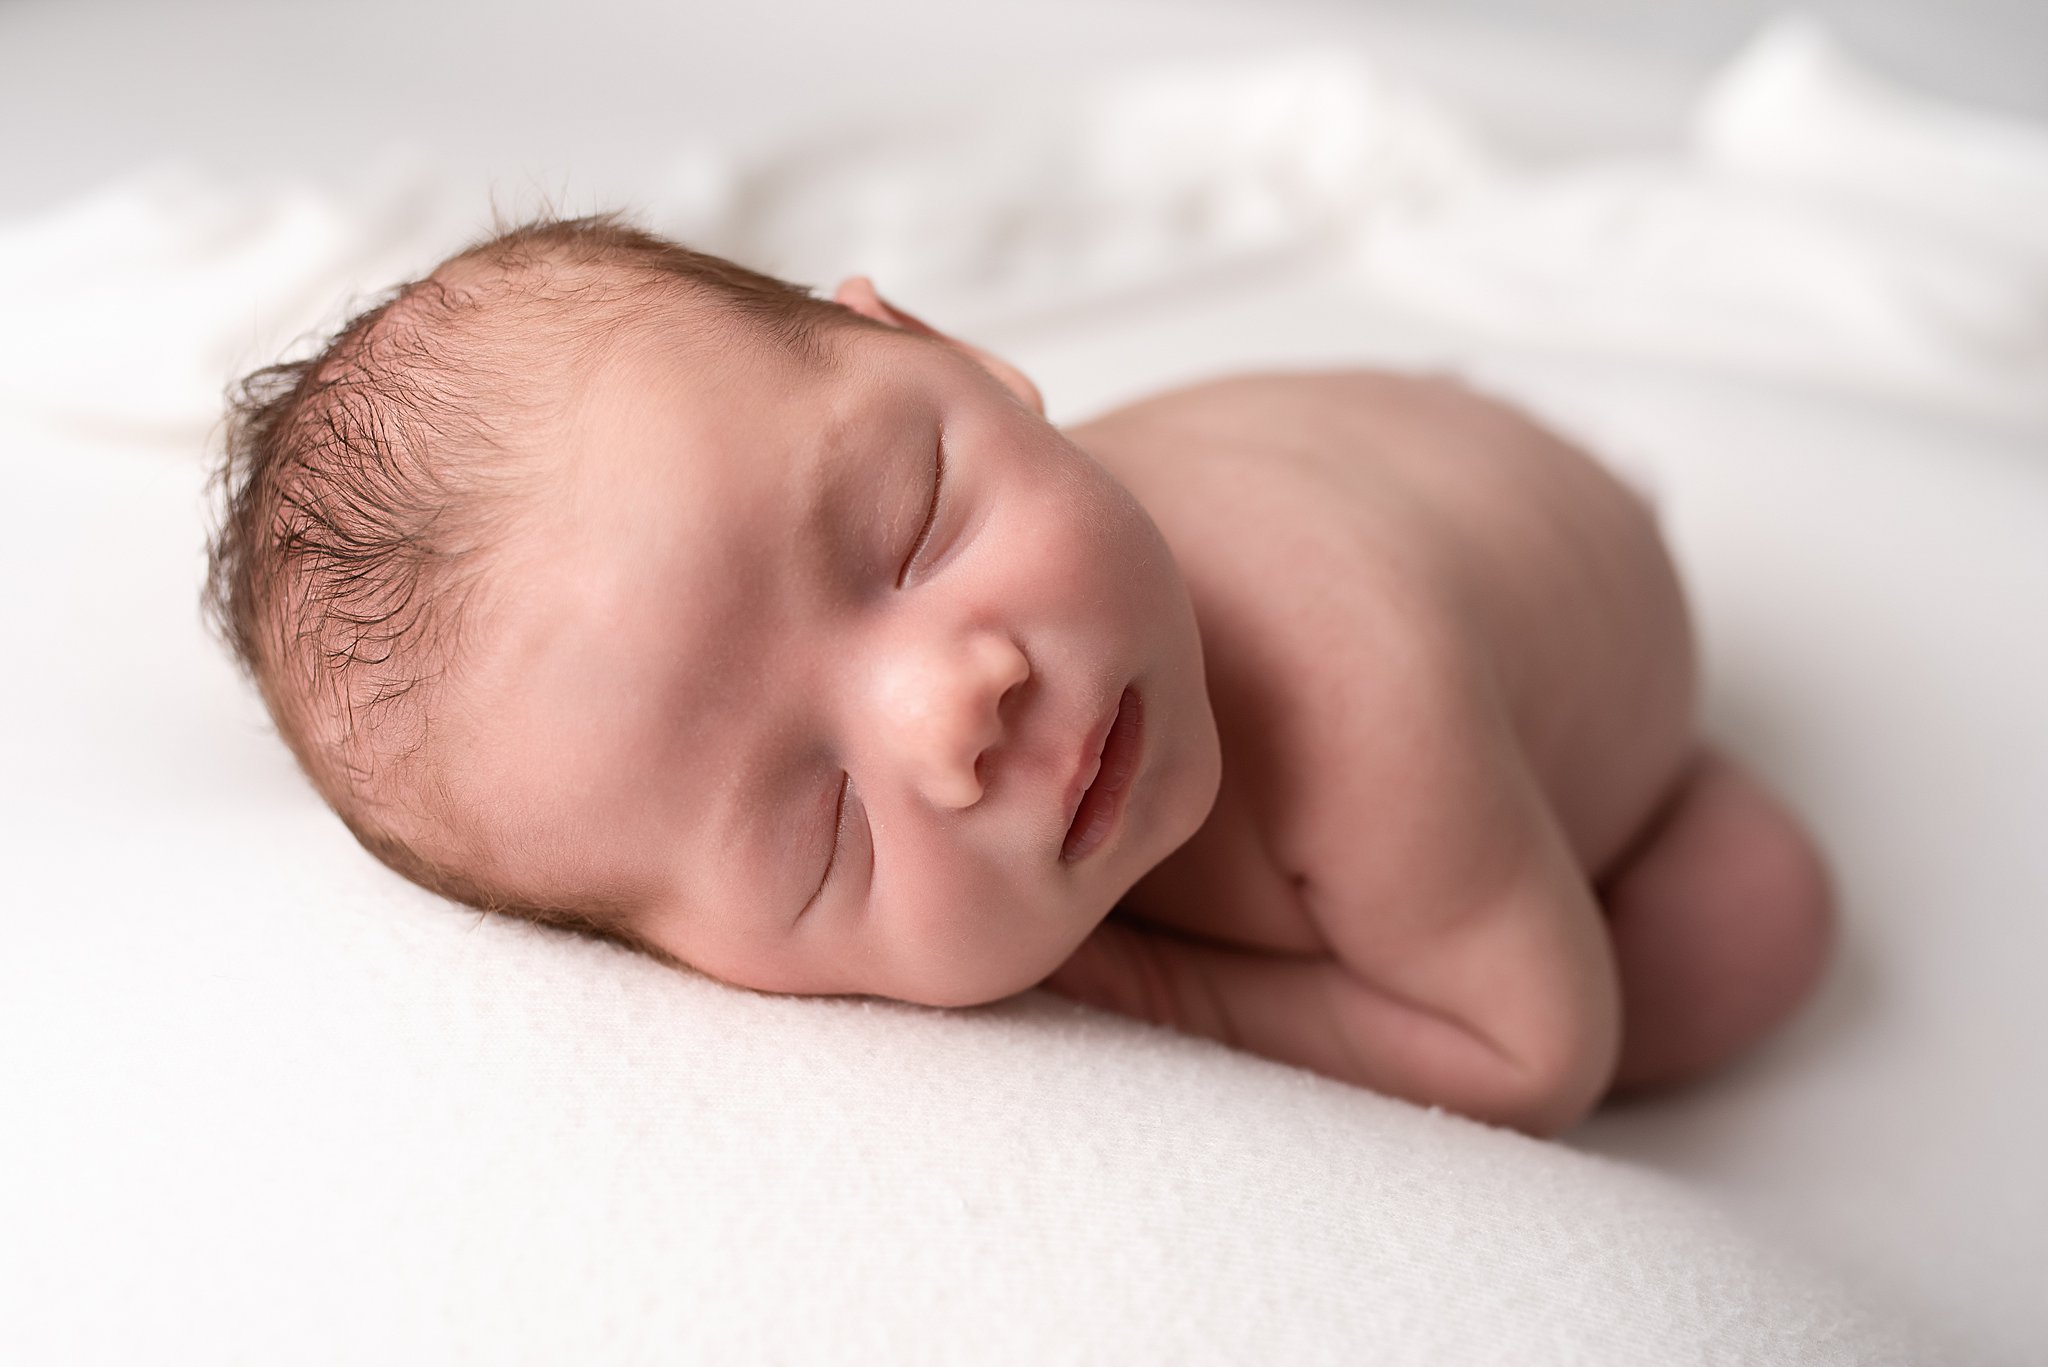 A newborn baby sleeps naked on a white bed san diego postpartum doula